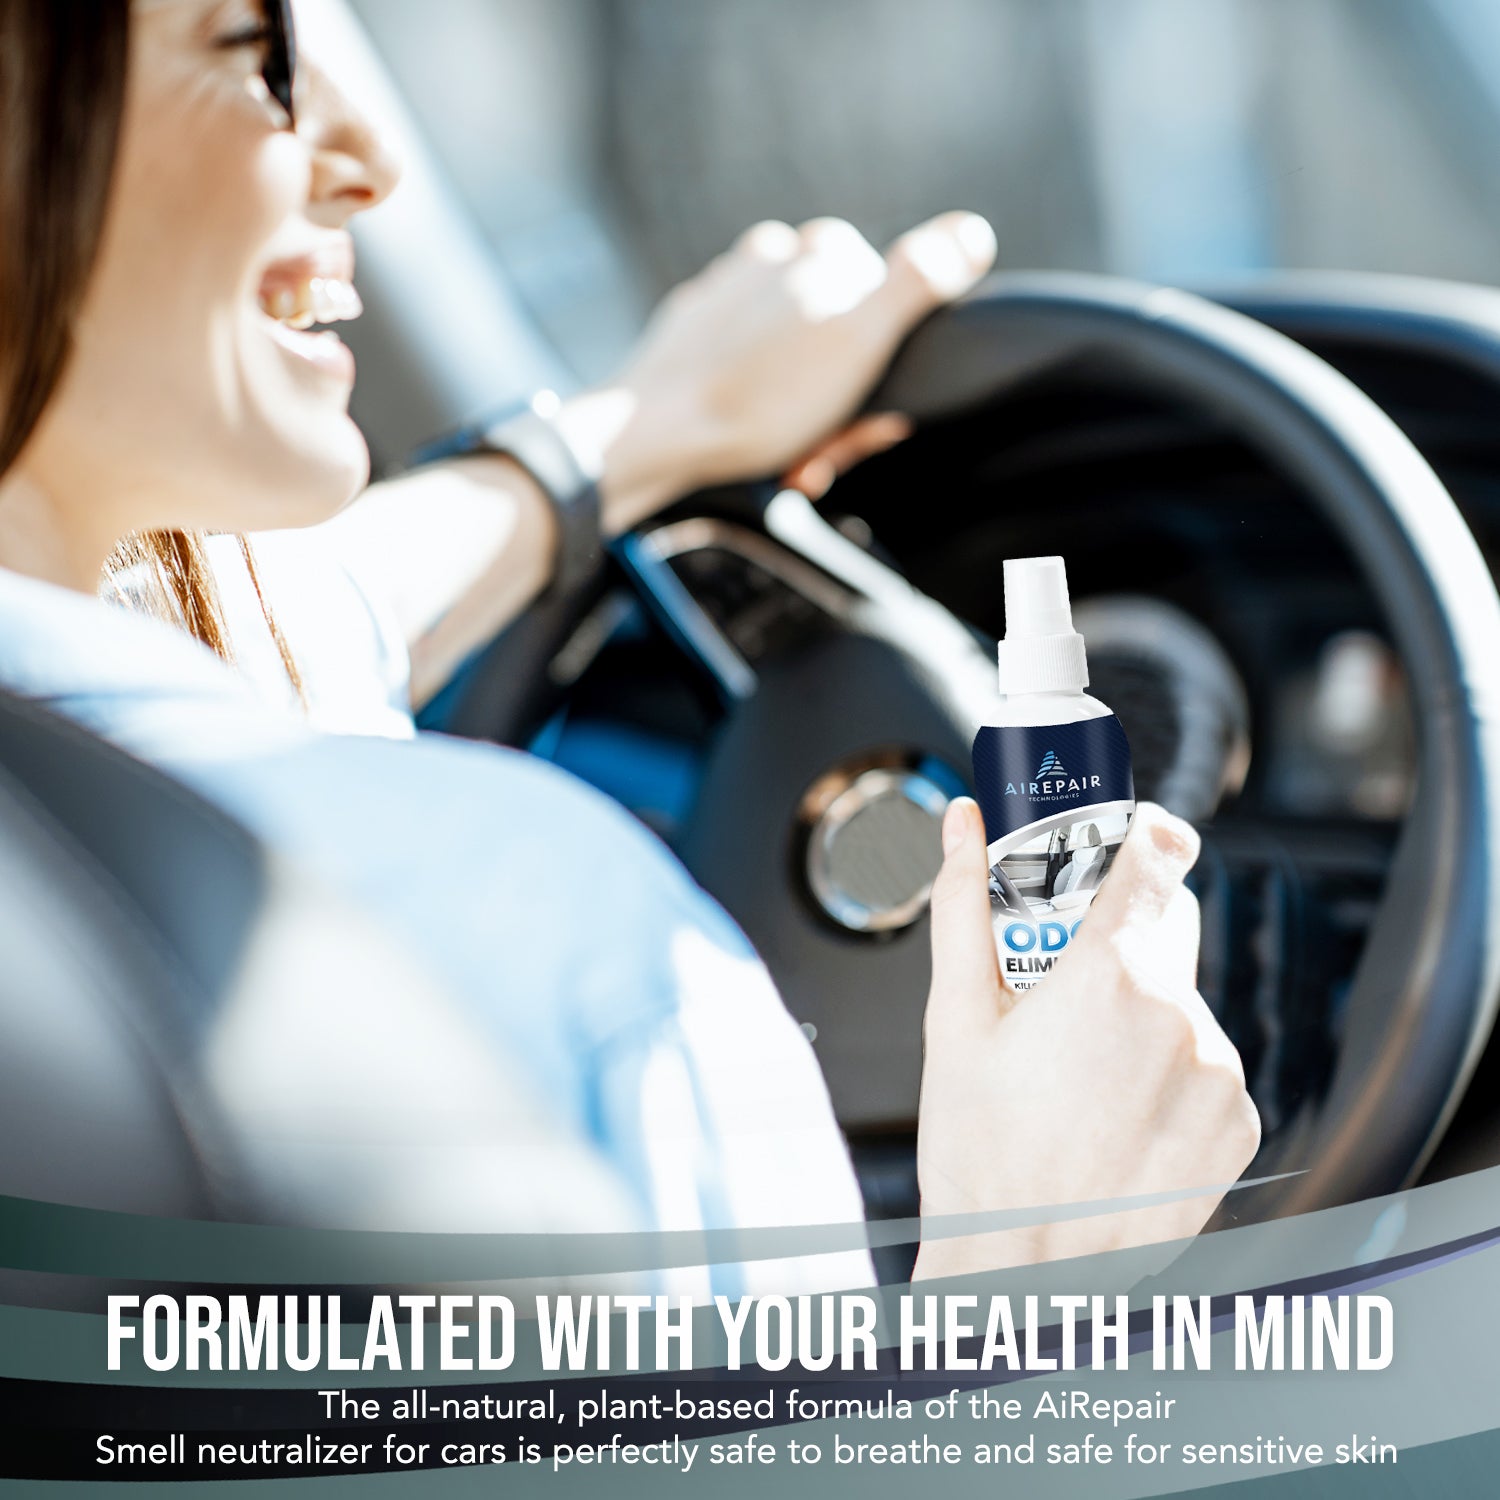 Car Air Freshener to Fight Odor